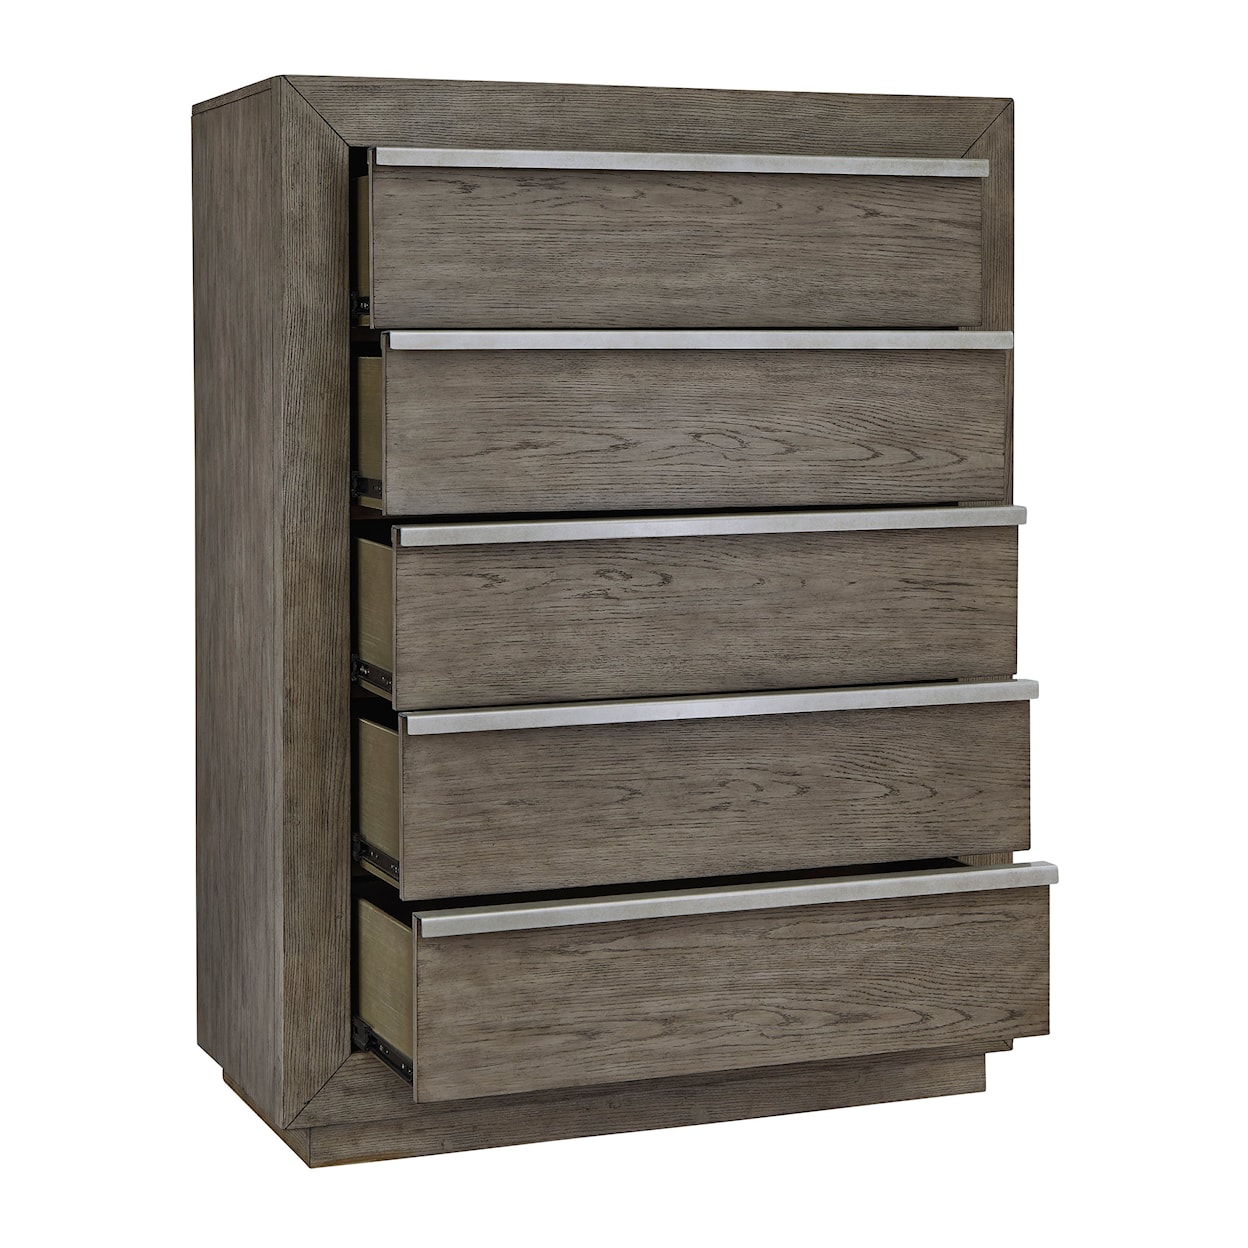 Benchcraft Anibecca Chest of Drawers